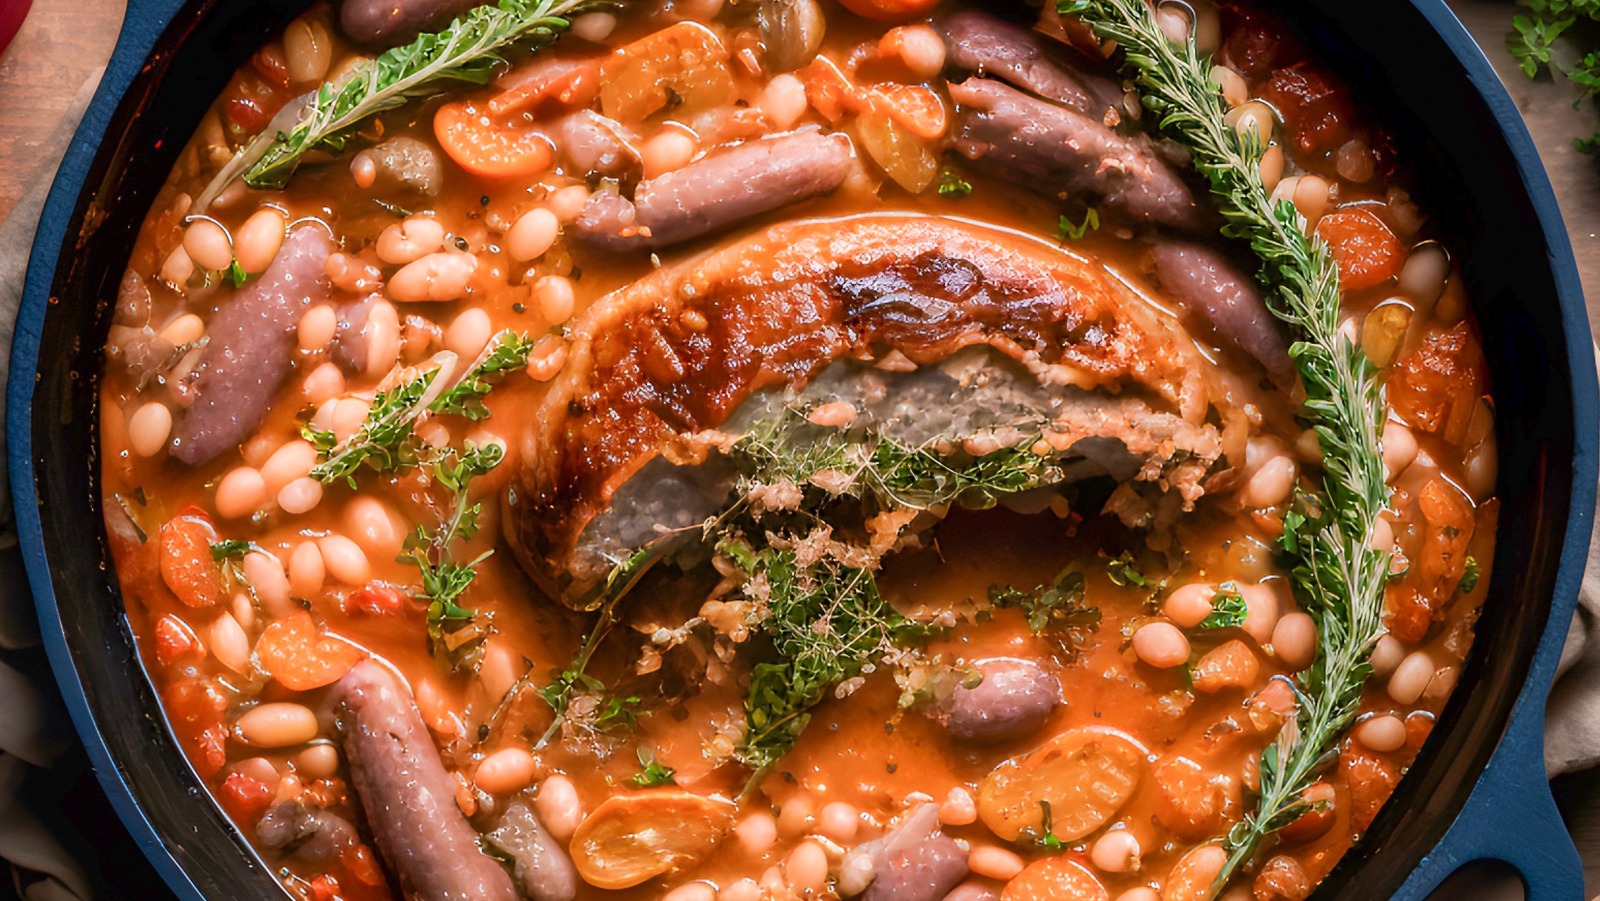 History of French Cassoulet